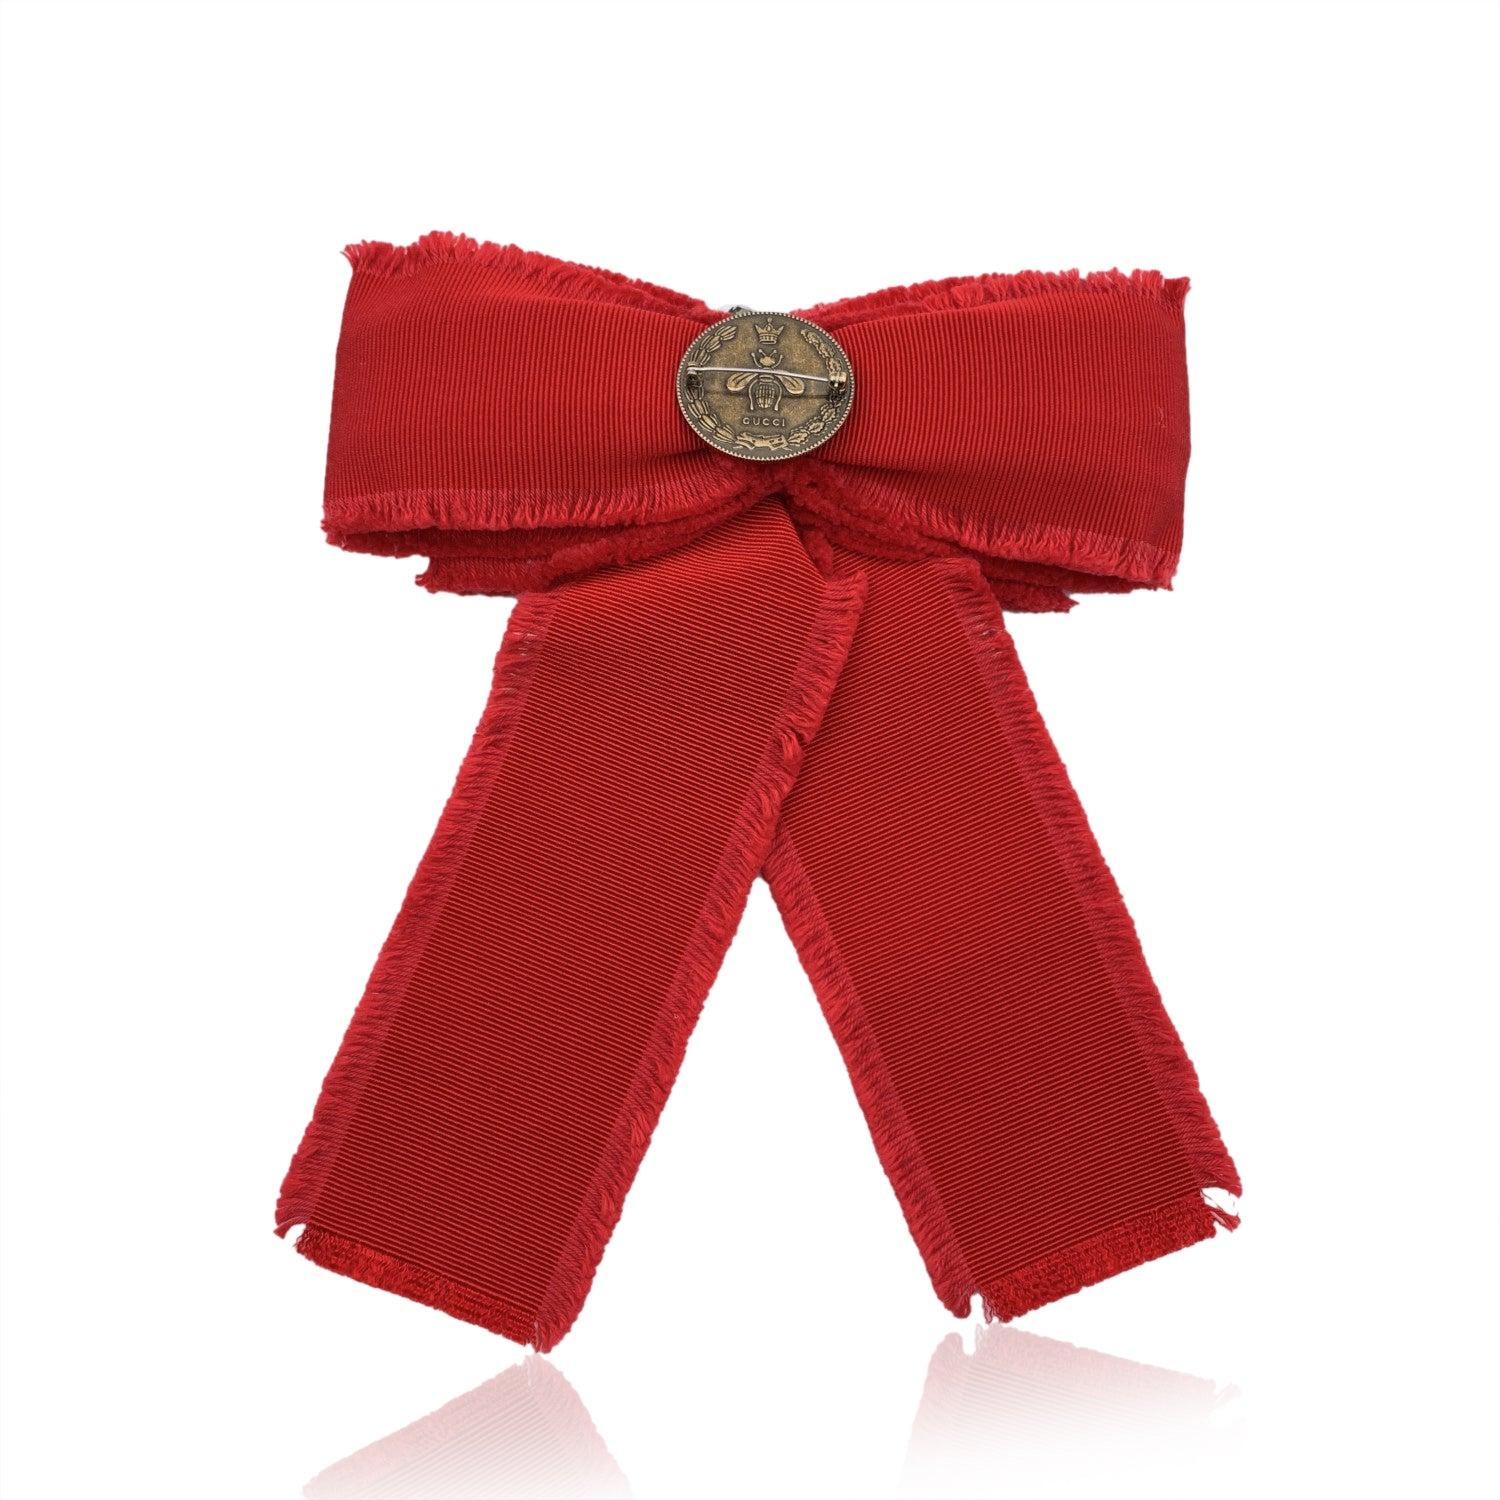 Beautiful Gucci red grosgrain bow brooch. Pearls and rhinestones embellishment on the front. Frayed edges. Safety pin closure on the back. Approx. width: 7 length - 17.7 cm. Approx. height: 8 inches - 20.3 cm. Signed 'Gucci' on back. Condition A+ -